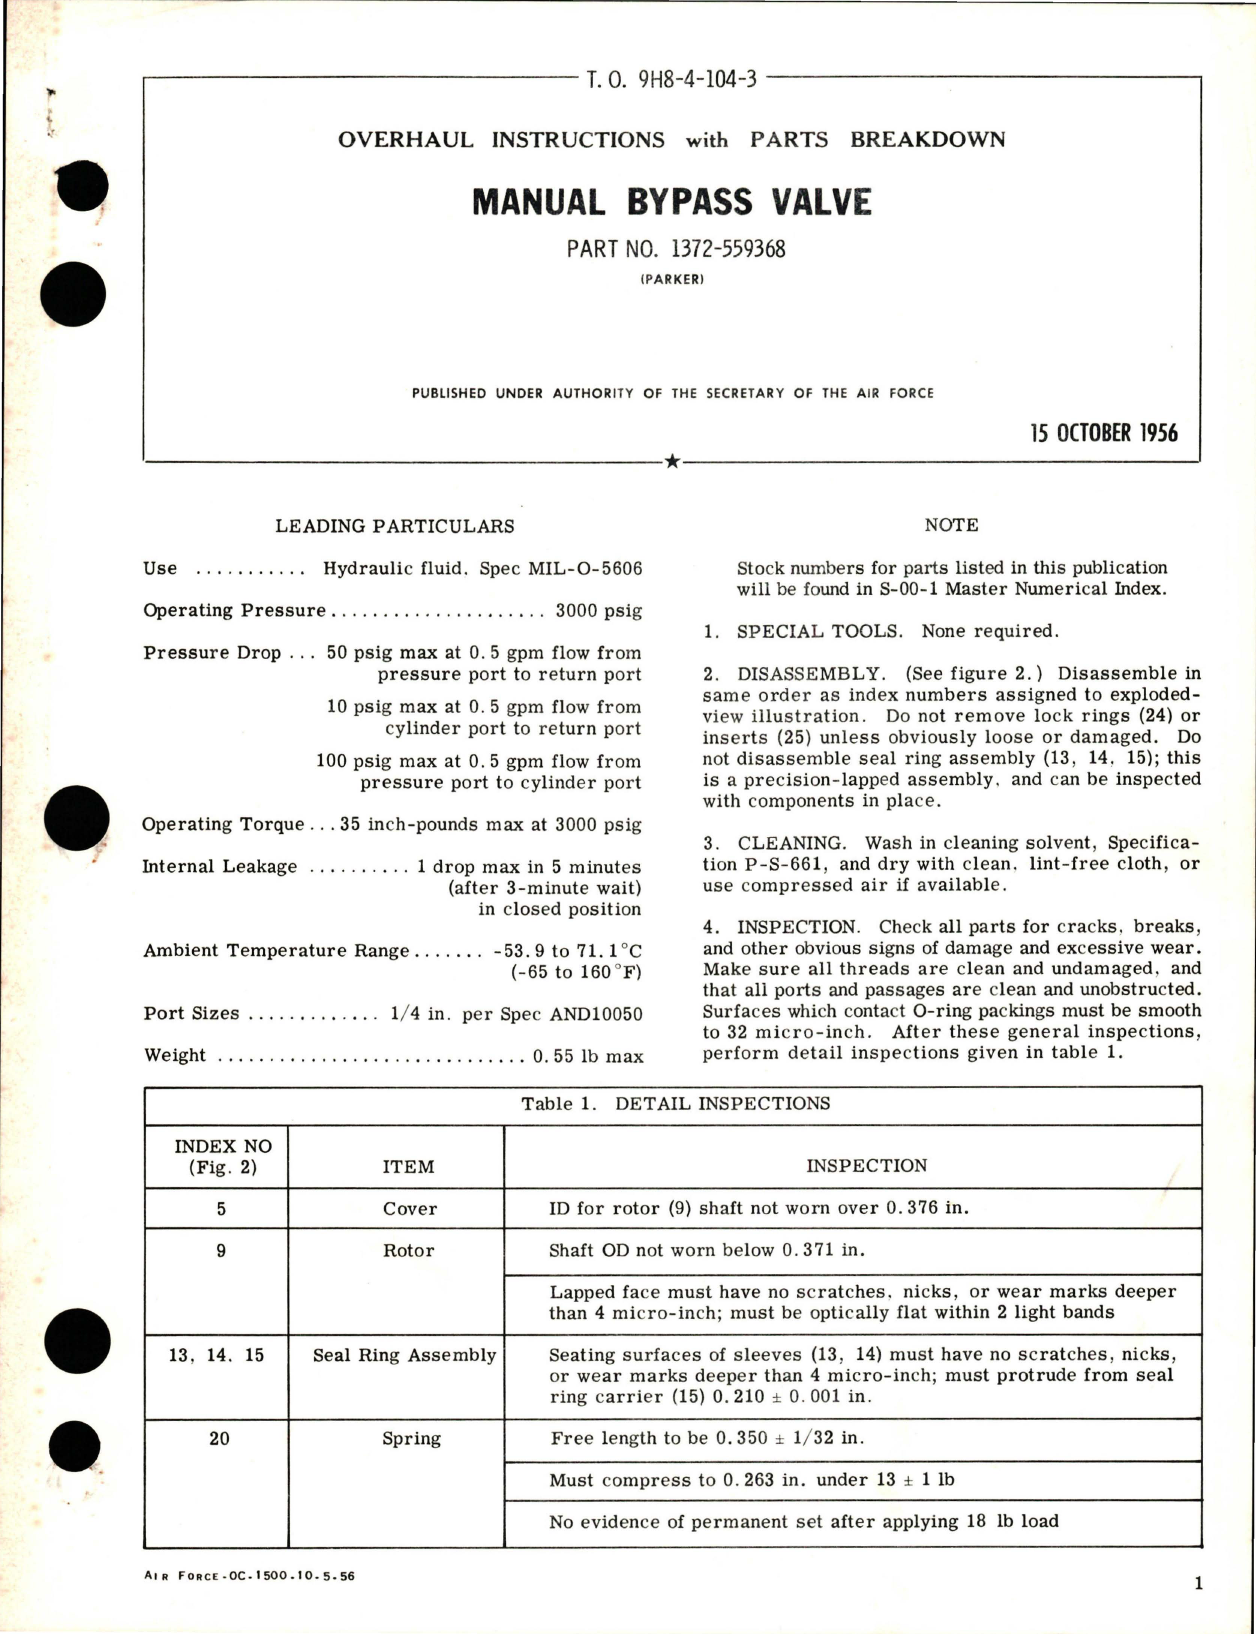 Sample page 1 from AirCorps Library document: Overhaul Instructions with Parts for Manual Bypass Valve - Part 1372-559368